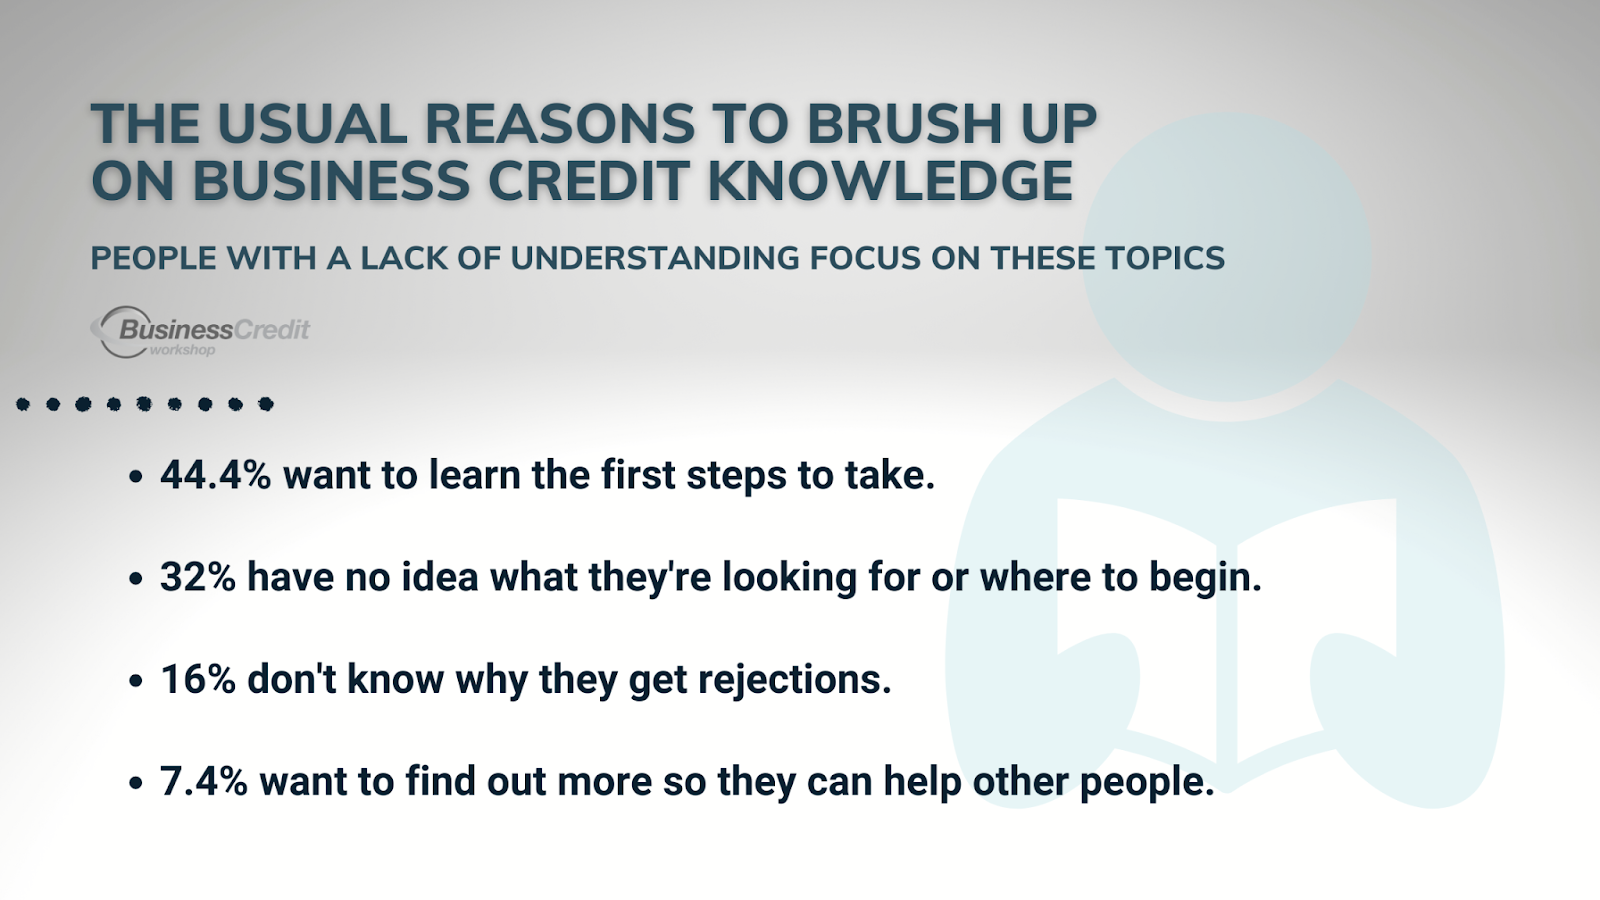 People want to brush up on their business credit knowledge to learn the first steps of the process, learn where to start, discover why they get rejections, or to find out more so they can help others. 